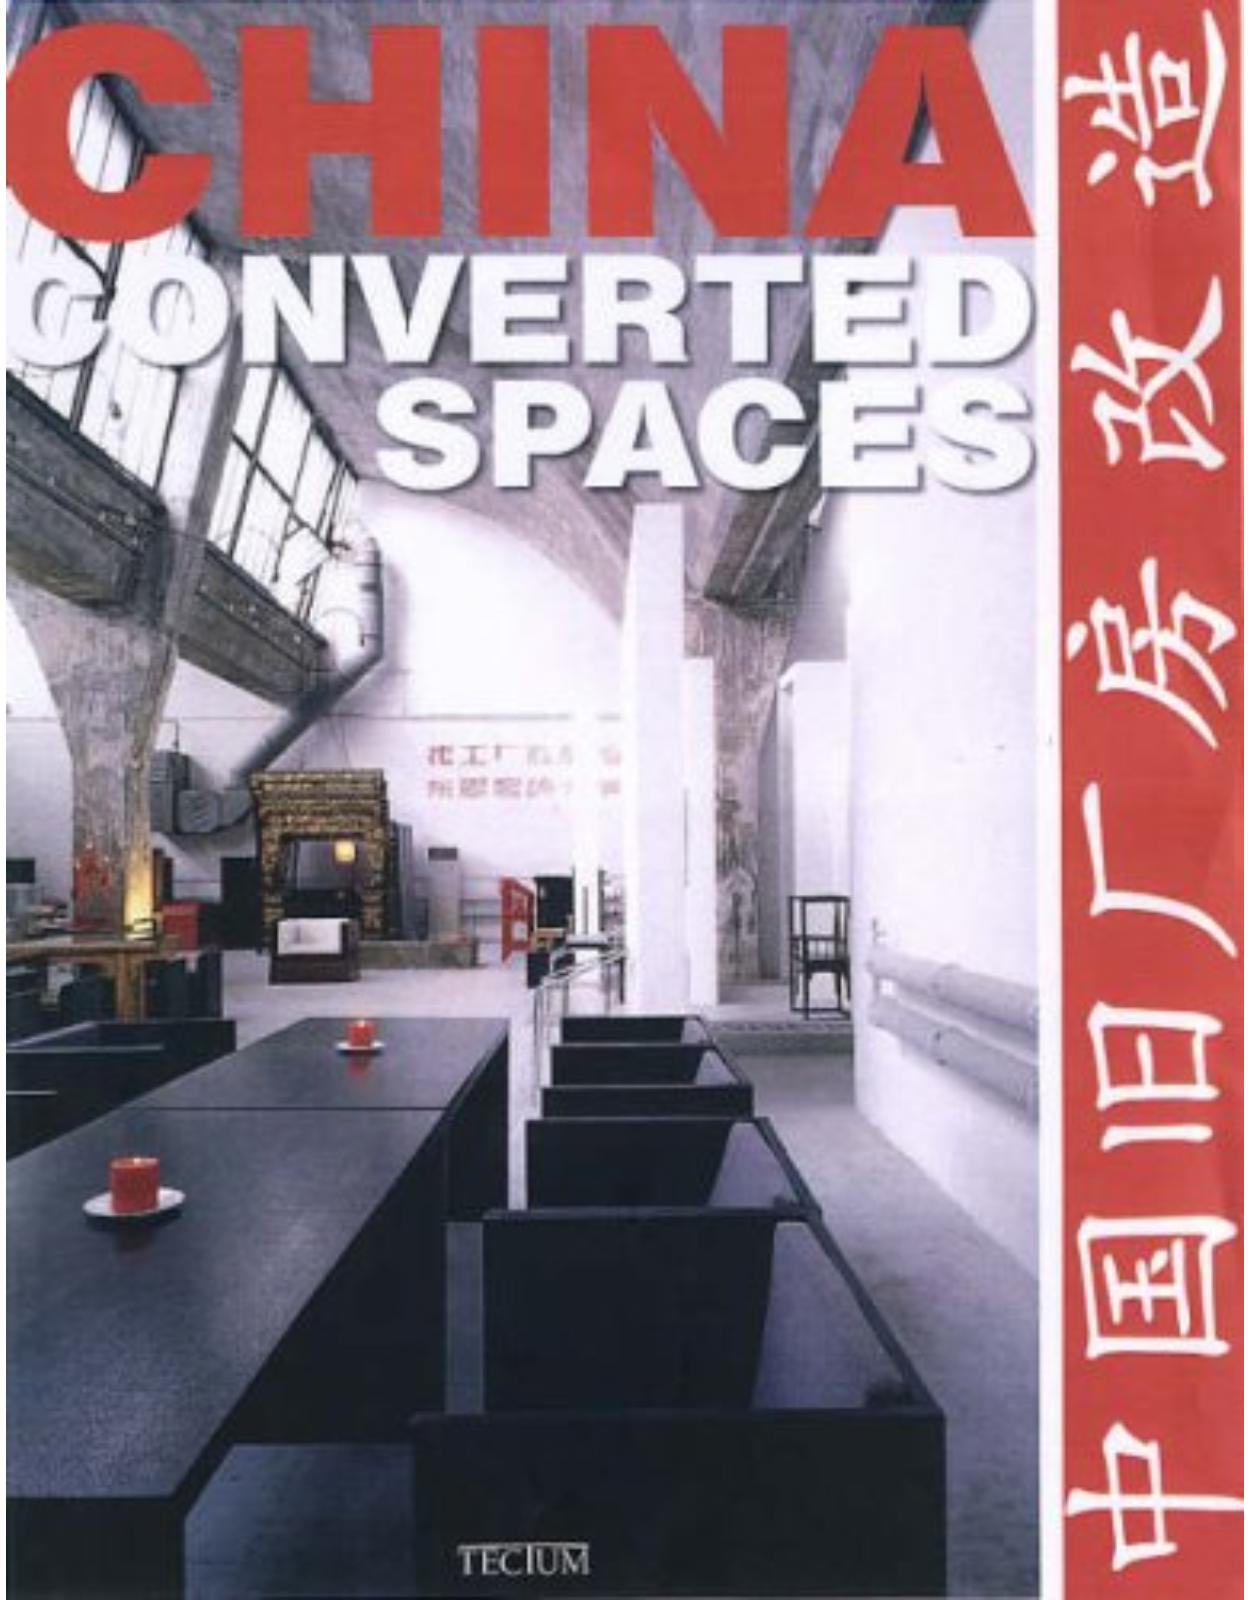 China: Converted Spaces